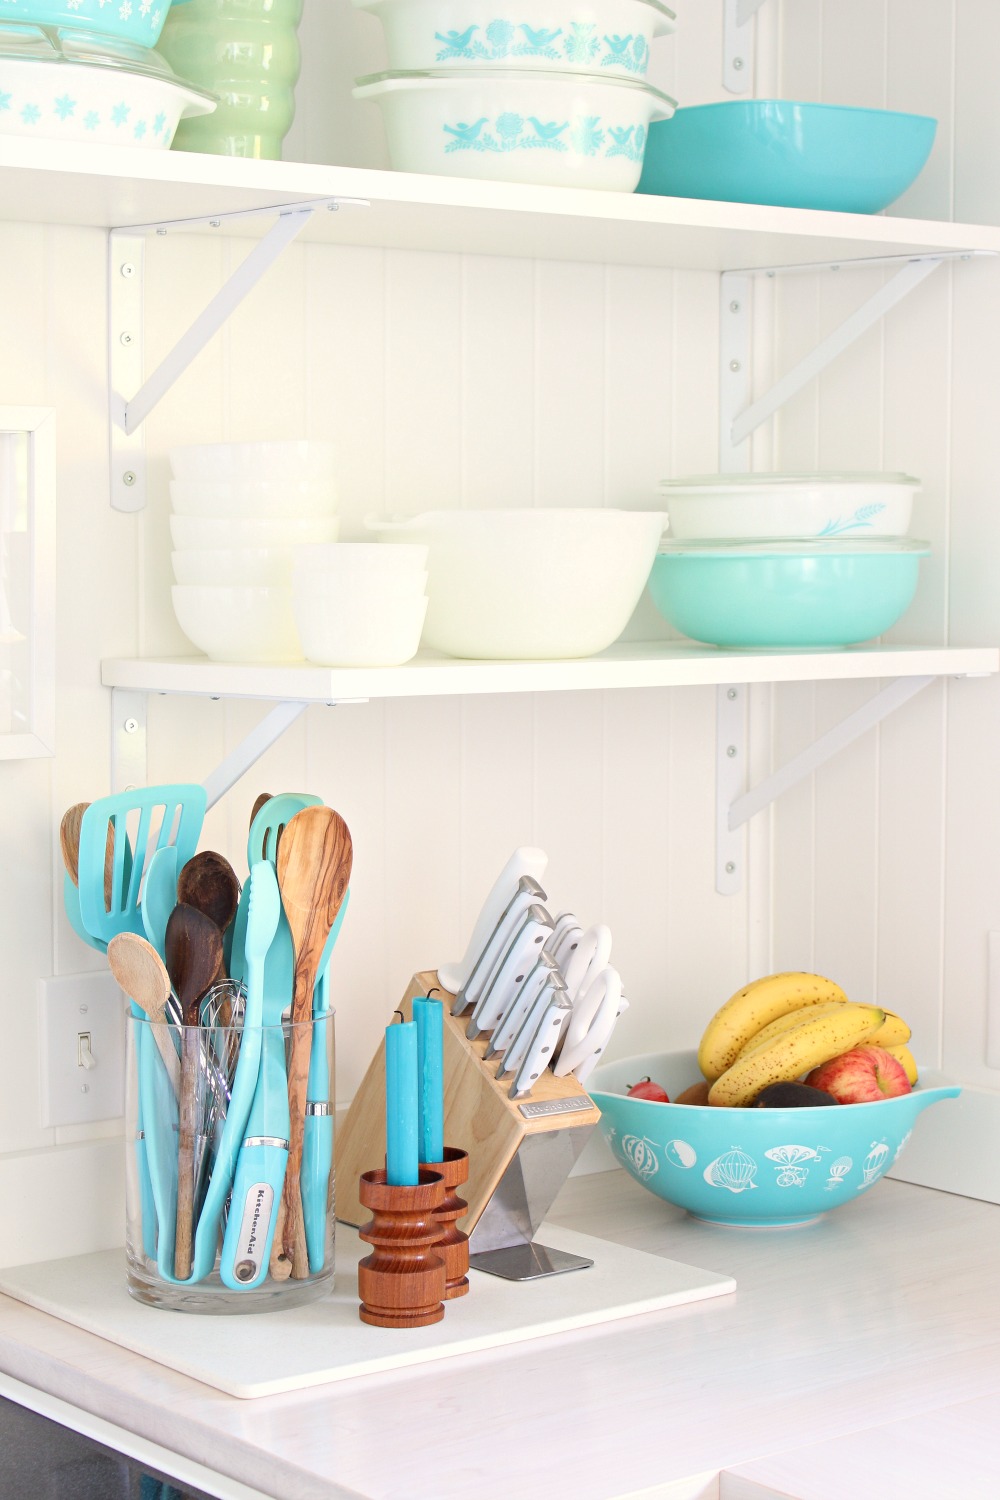 20 Gorgeous Turquoise Kitchen Accessories to Love | Dans ...